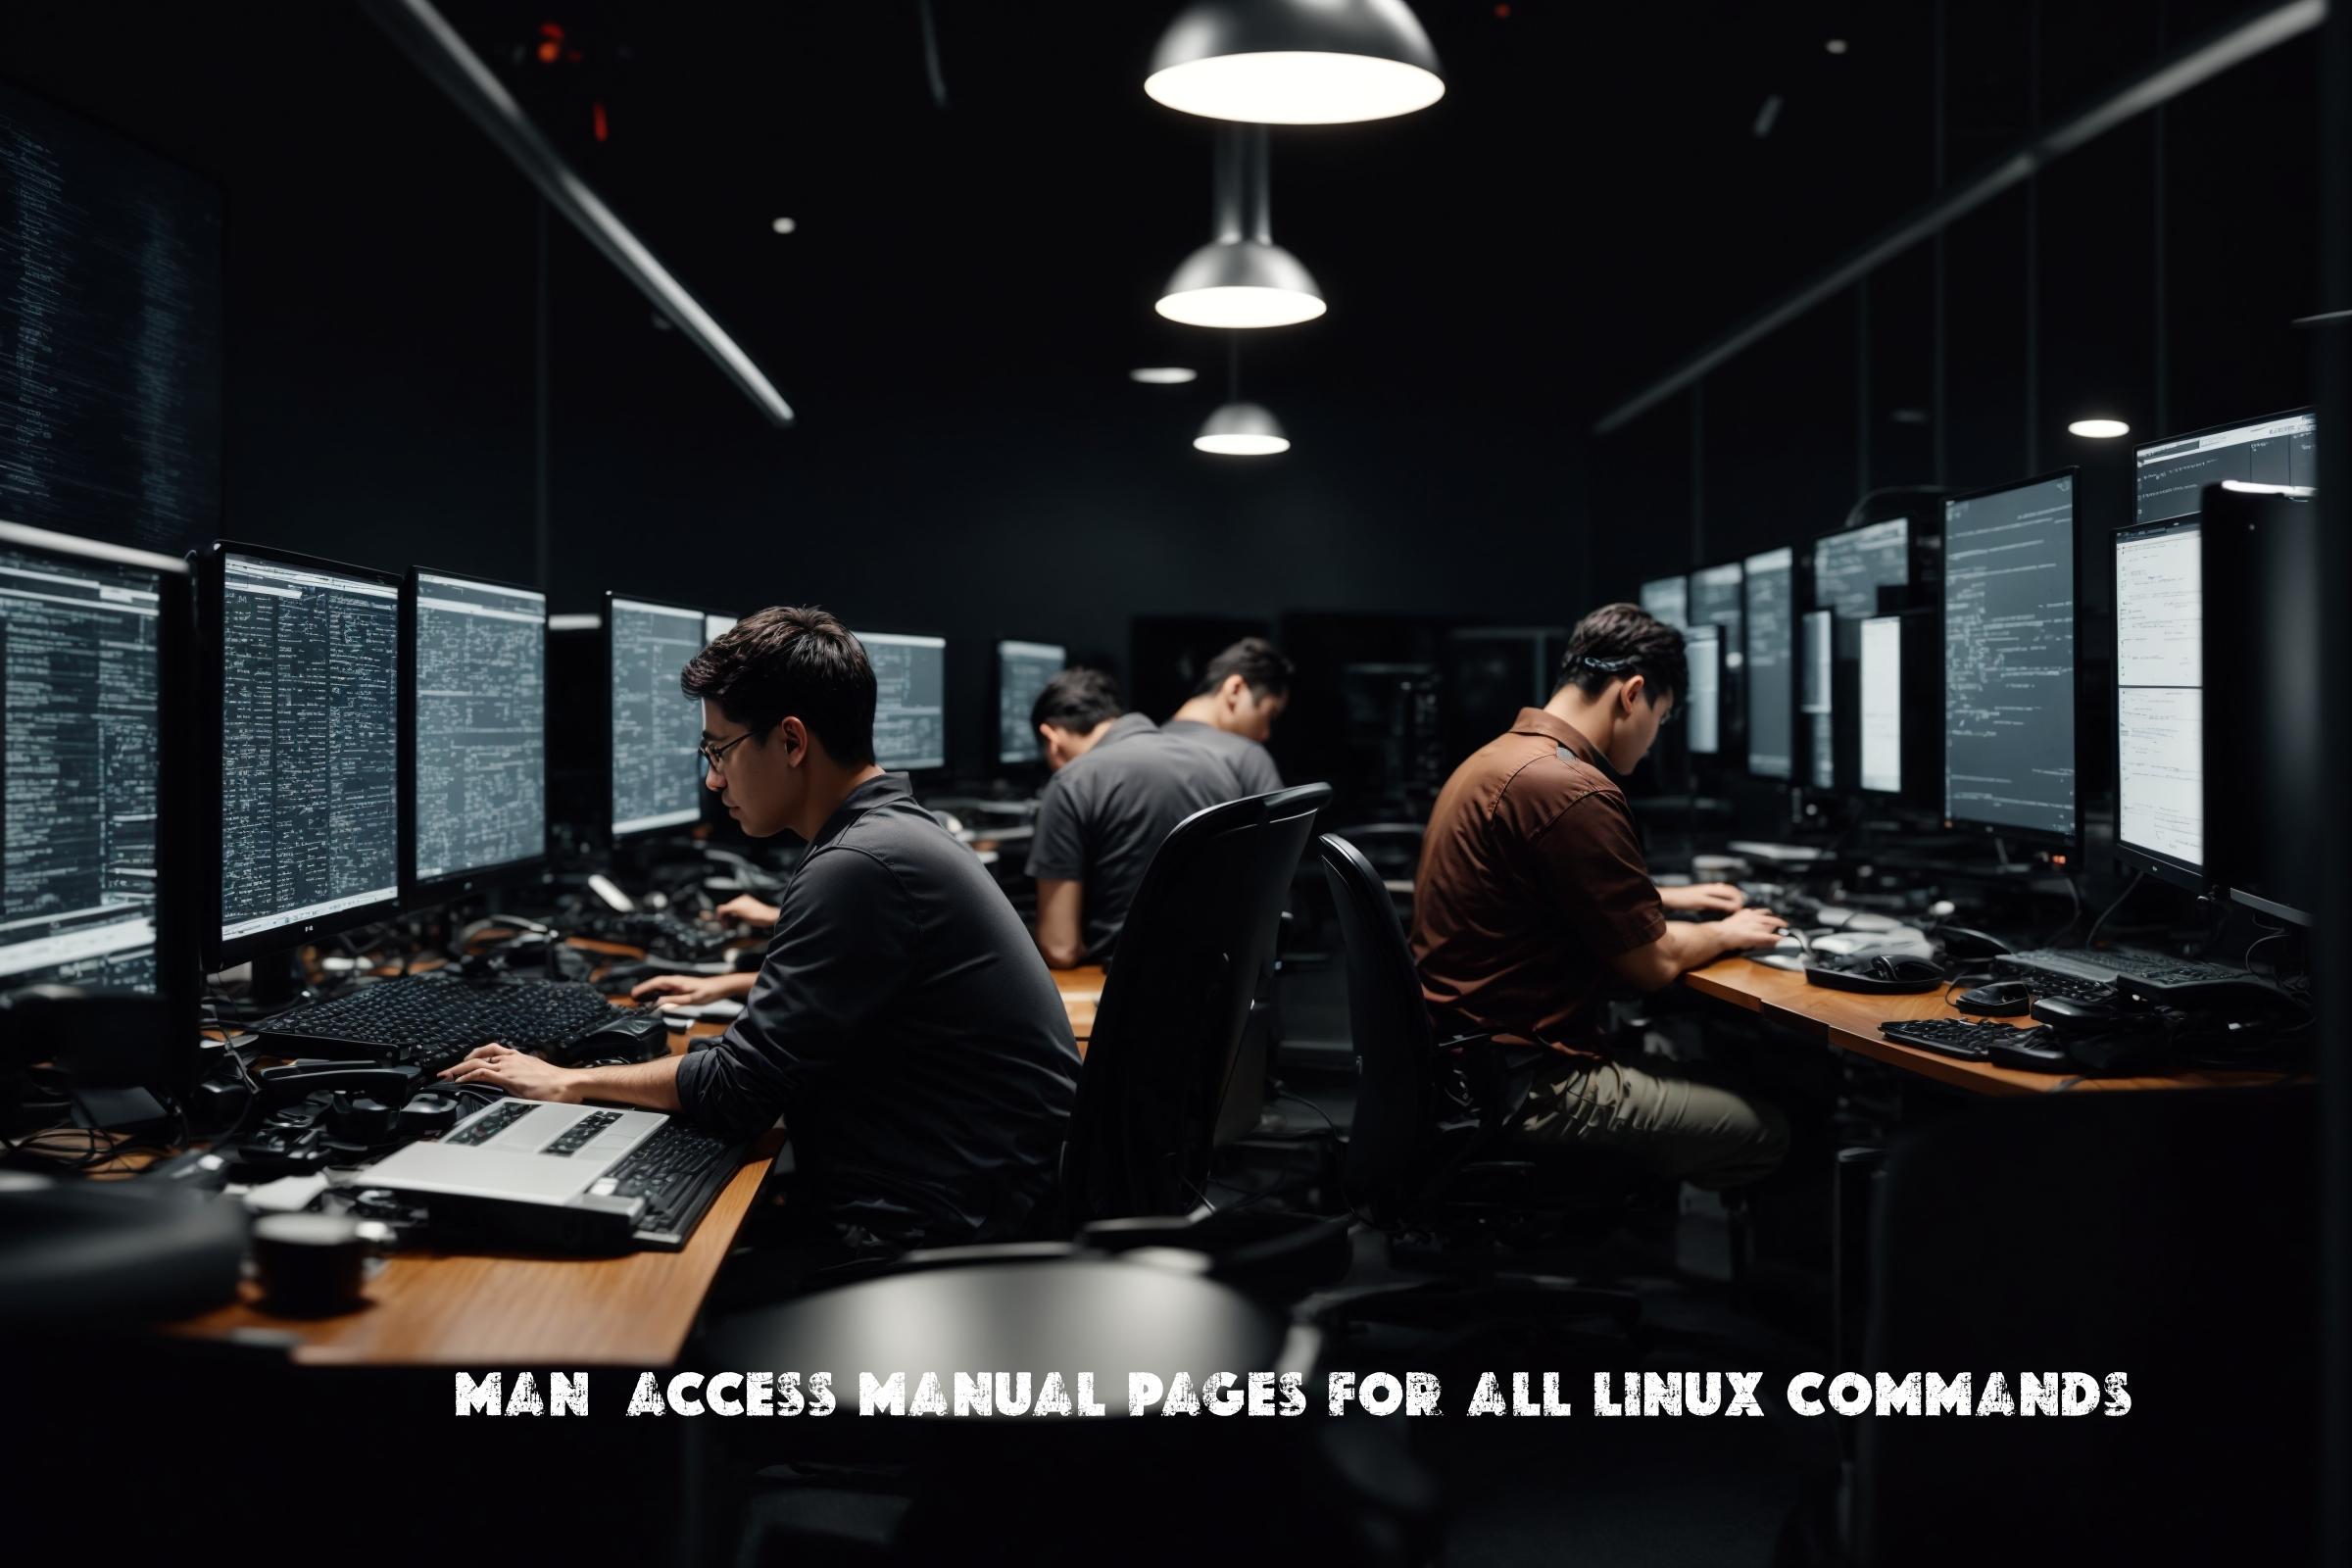 man (Access manual pages for all Linux commands)